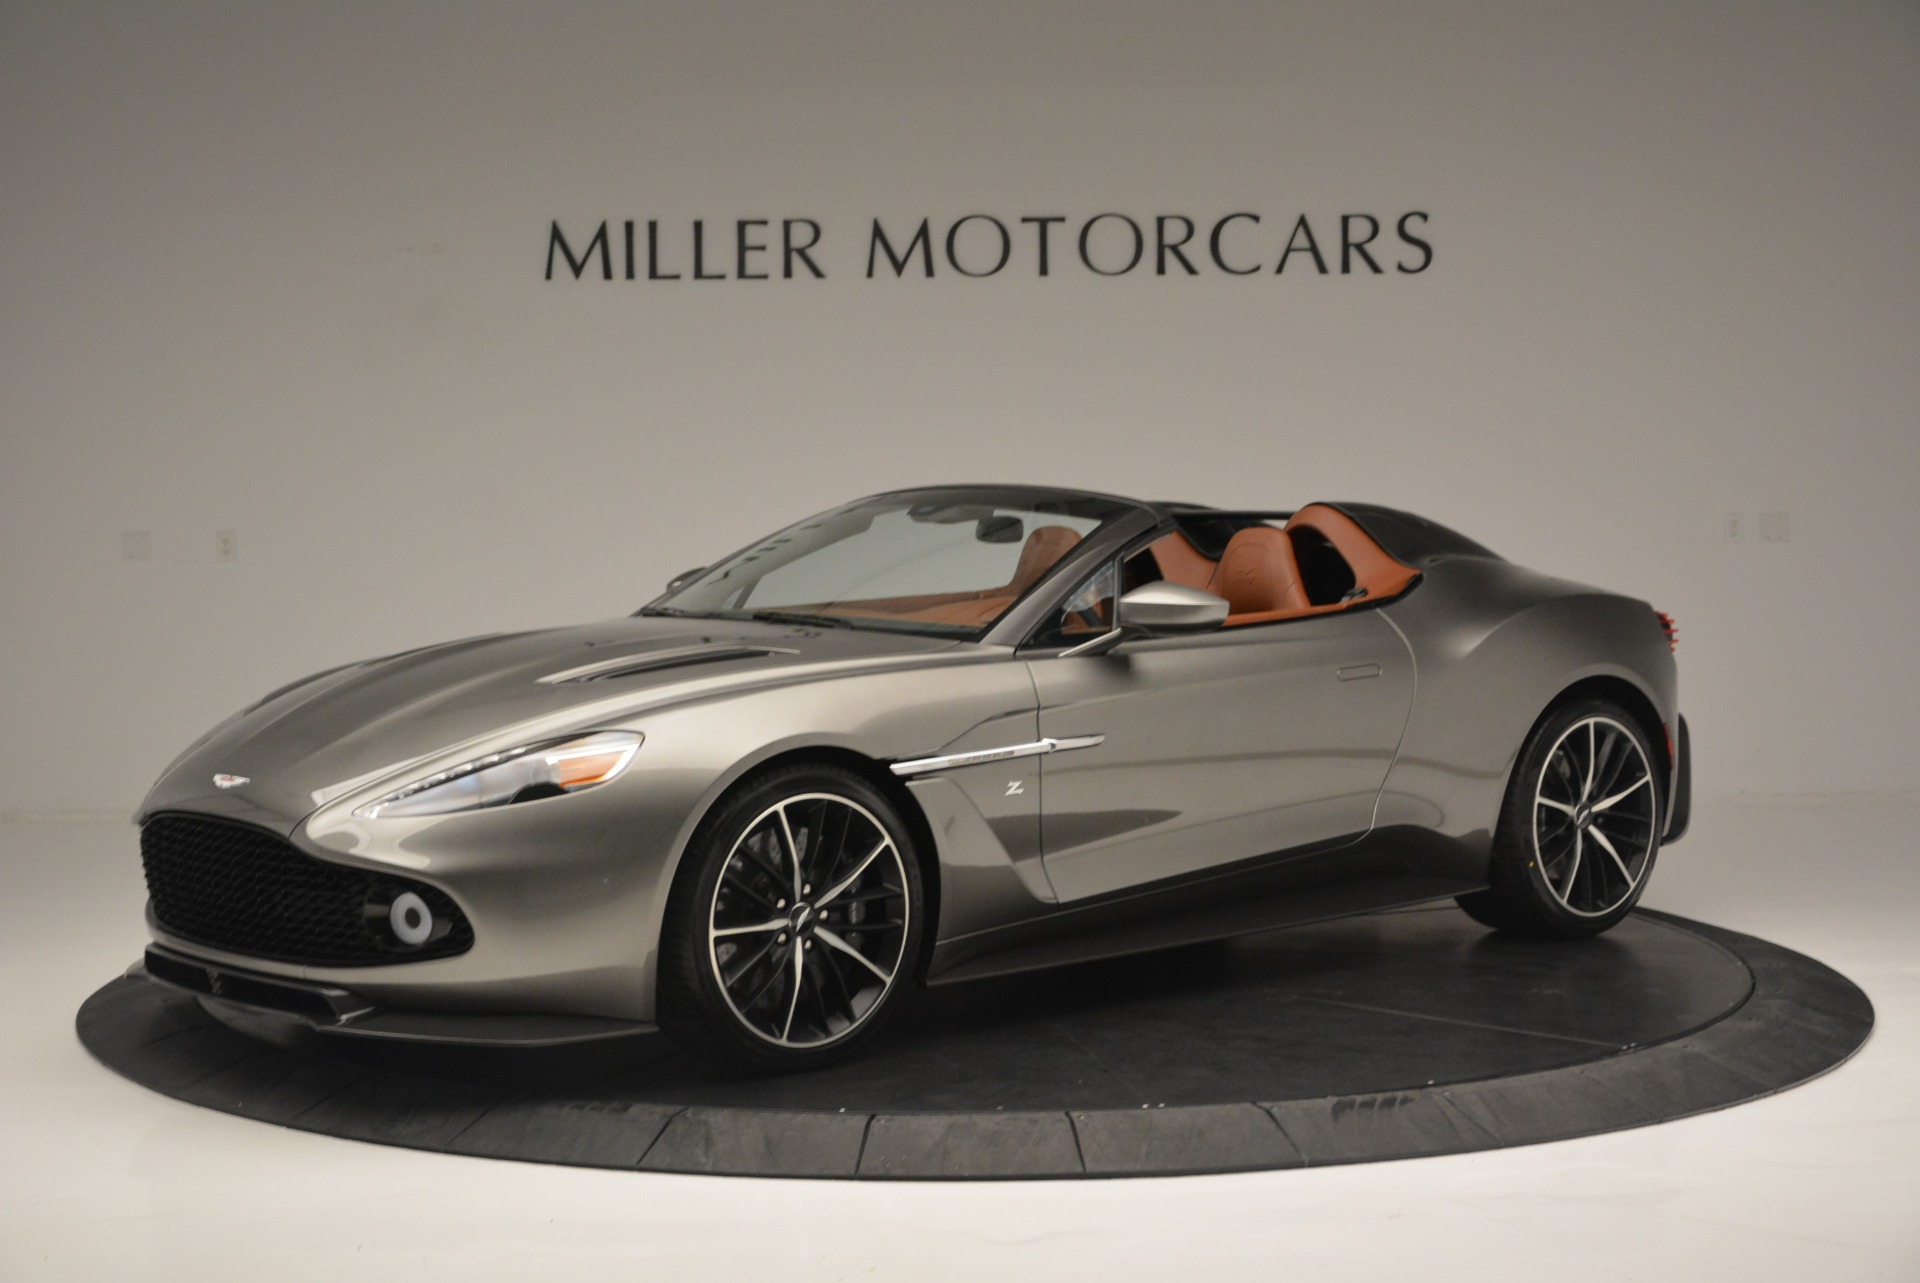 Used 2018 Aston Martin Zagato Speedster Convertible for sale Sold at Alfa Romeo of Westport in Westport CT 06880 1